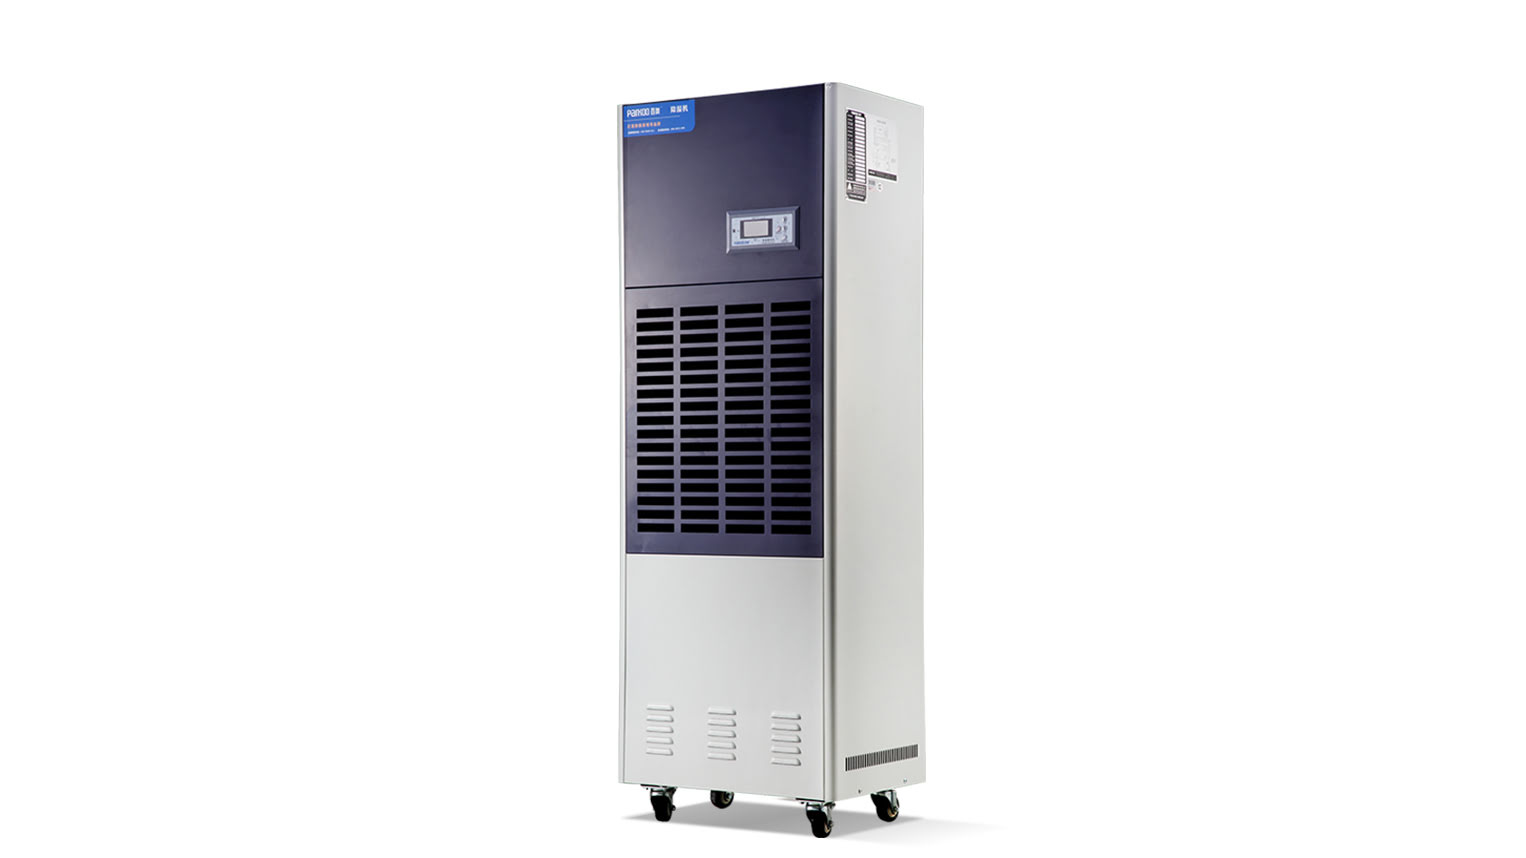 Come here and have a look. I know how to choose a dehumidifier